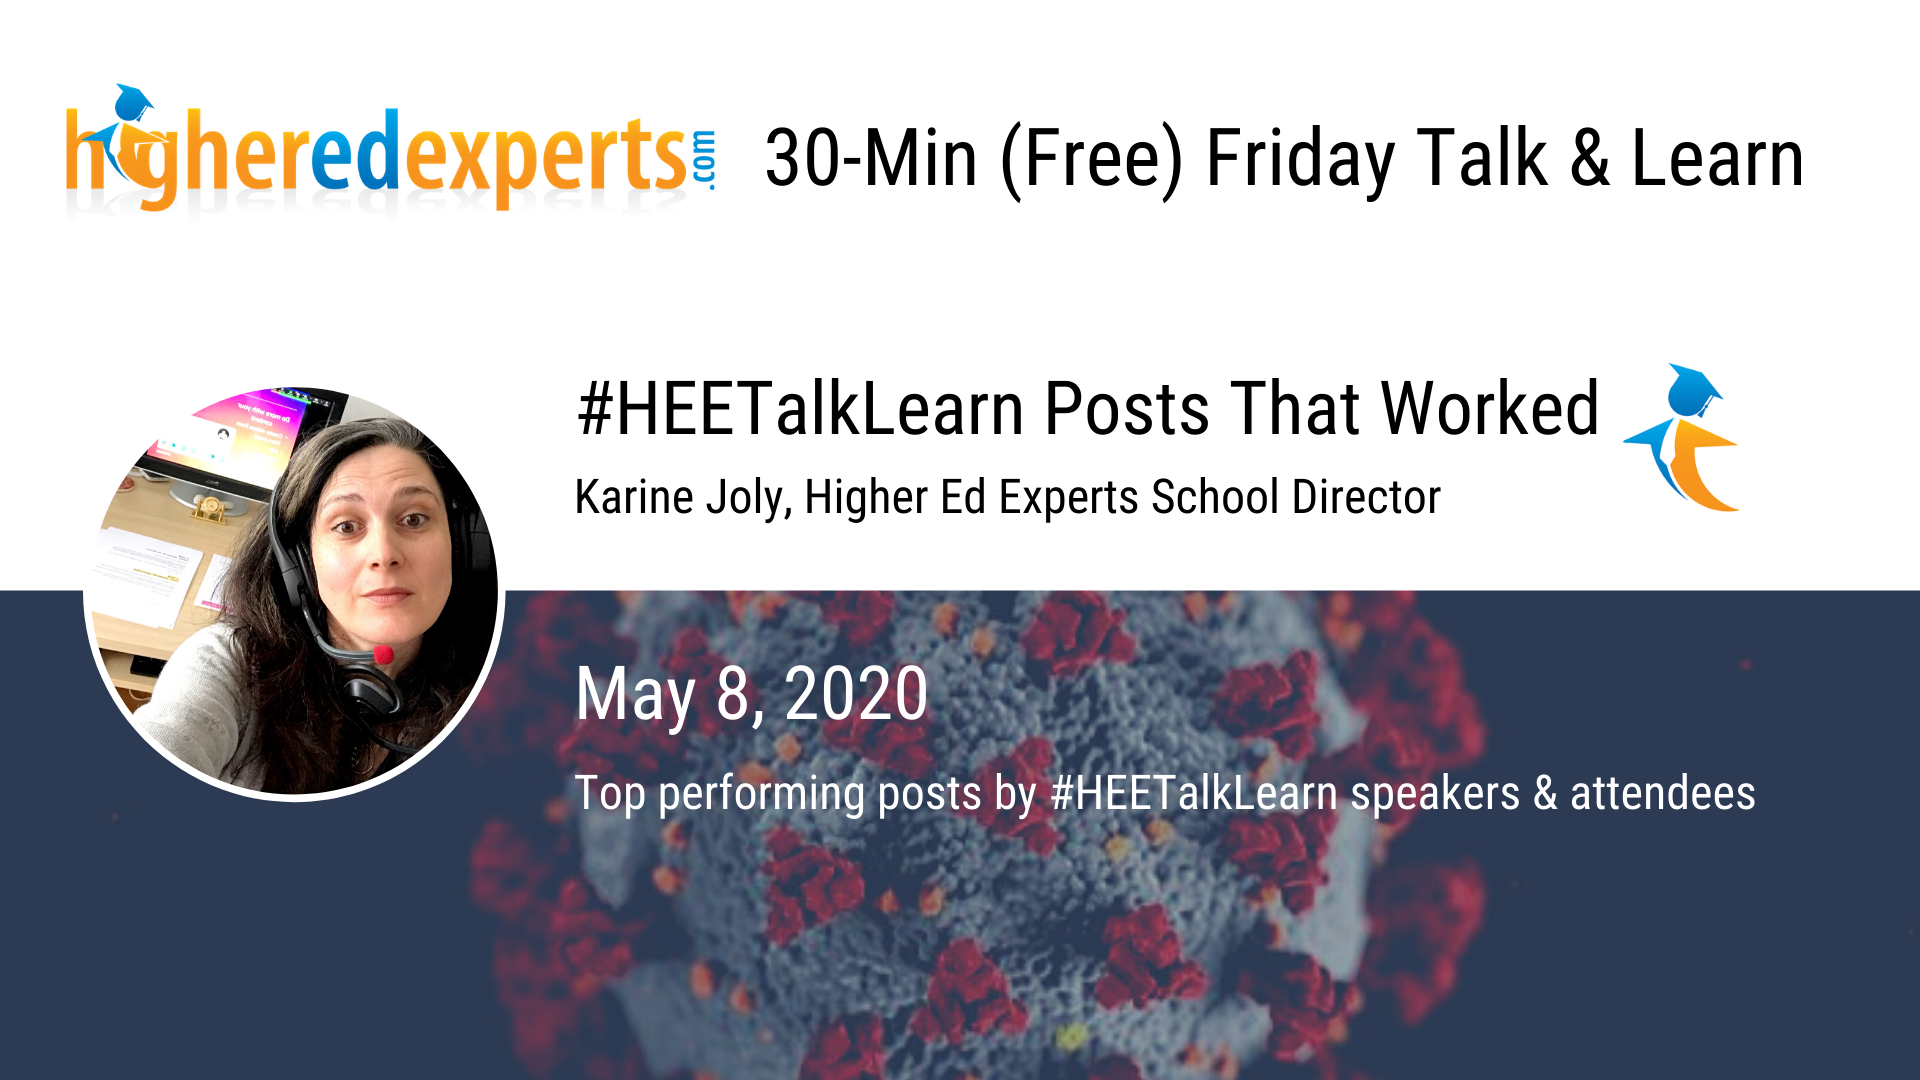 #HEETalkLearn Posts that Worked (May 8, 2020): UCF Commencement, Tom Hank’s 5-Min Speech, Giving Tuesday, Virtual Alma Mater & Coloring Pages